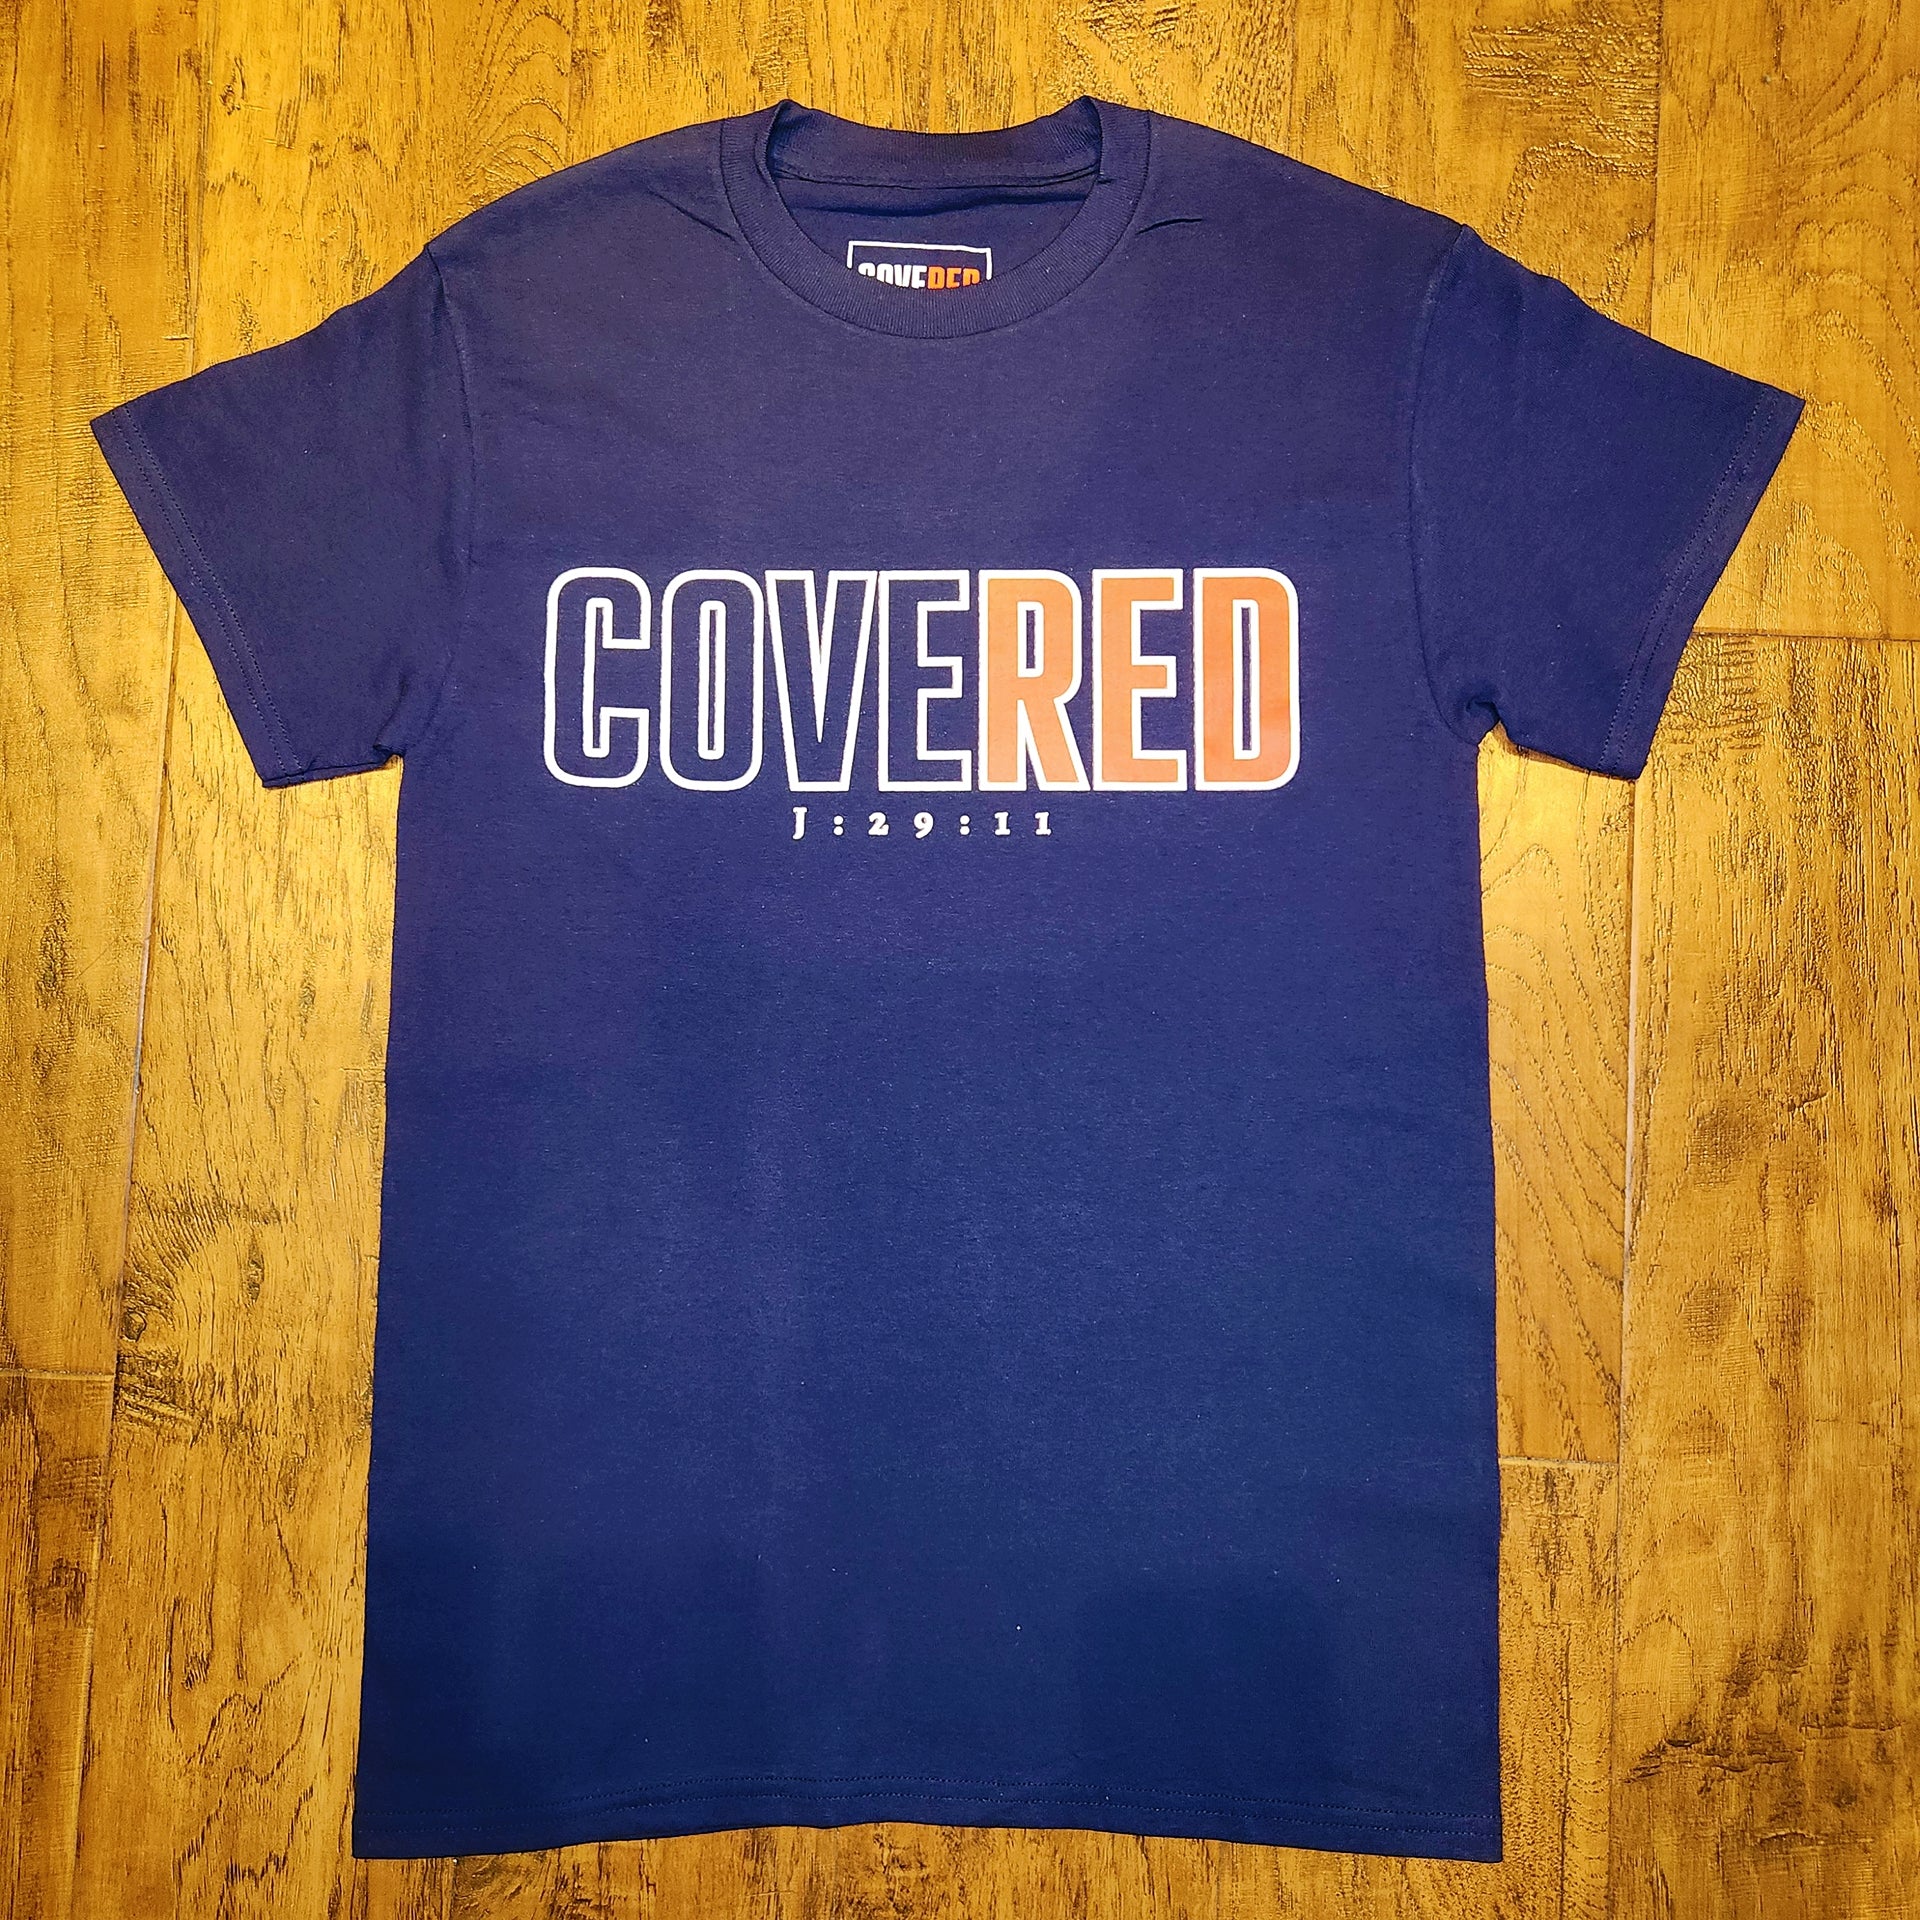 (Navy) Covered J:29:11 Statement T-shirt